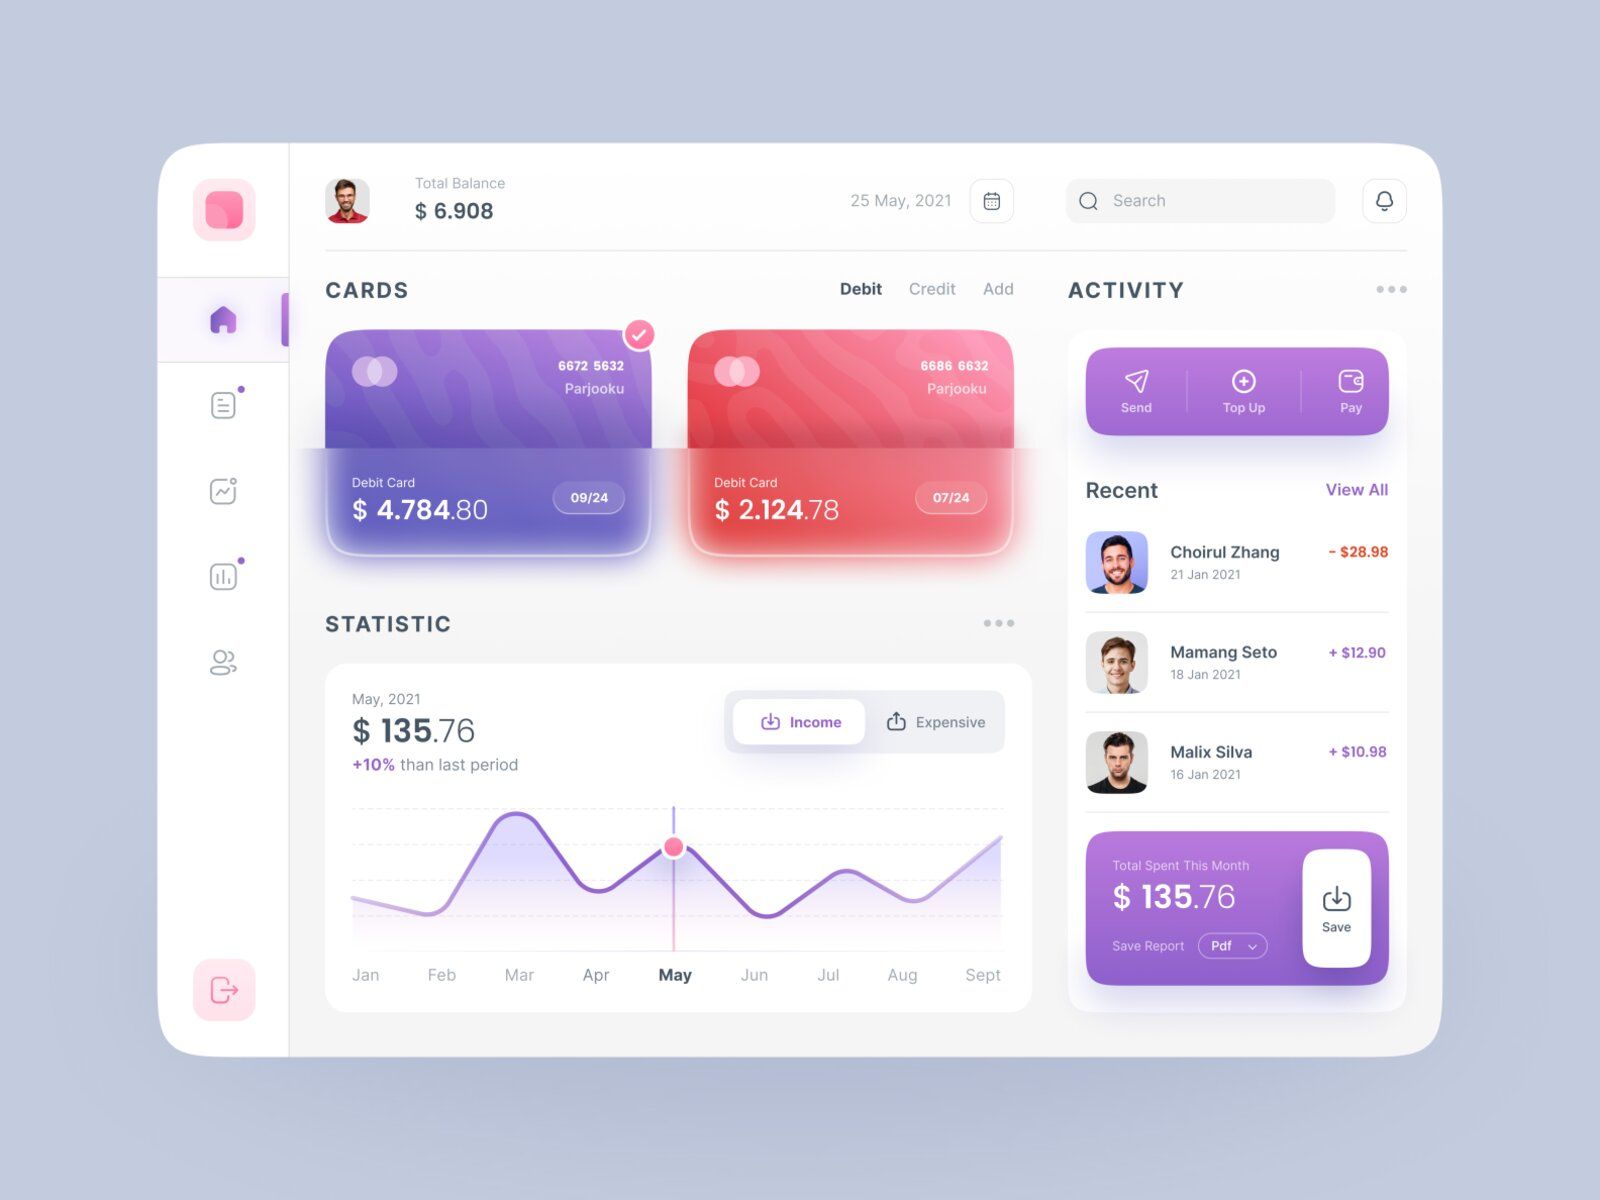 Online accounting software that’s ready-to-use is great for small businesses since features like sending invoices or tracking accounting tasks would be enough (*image by [Olha Sivakovska 🦝](https://dribbble.com/sivakovska){ rel="nofollow" target="_blank" .default-md}*)